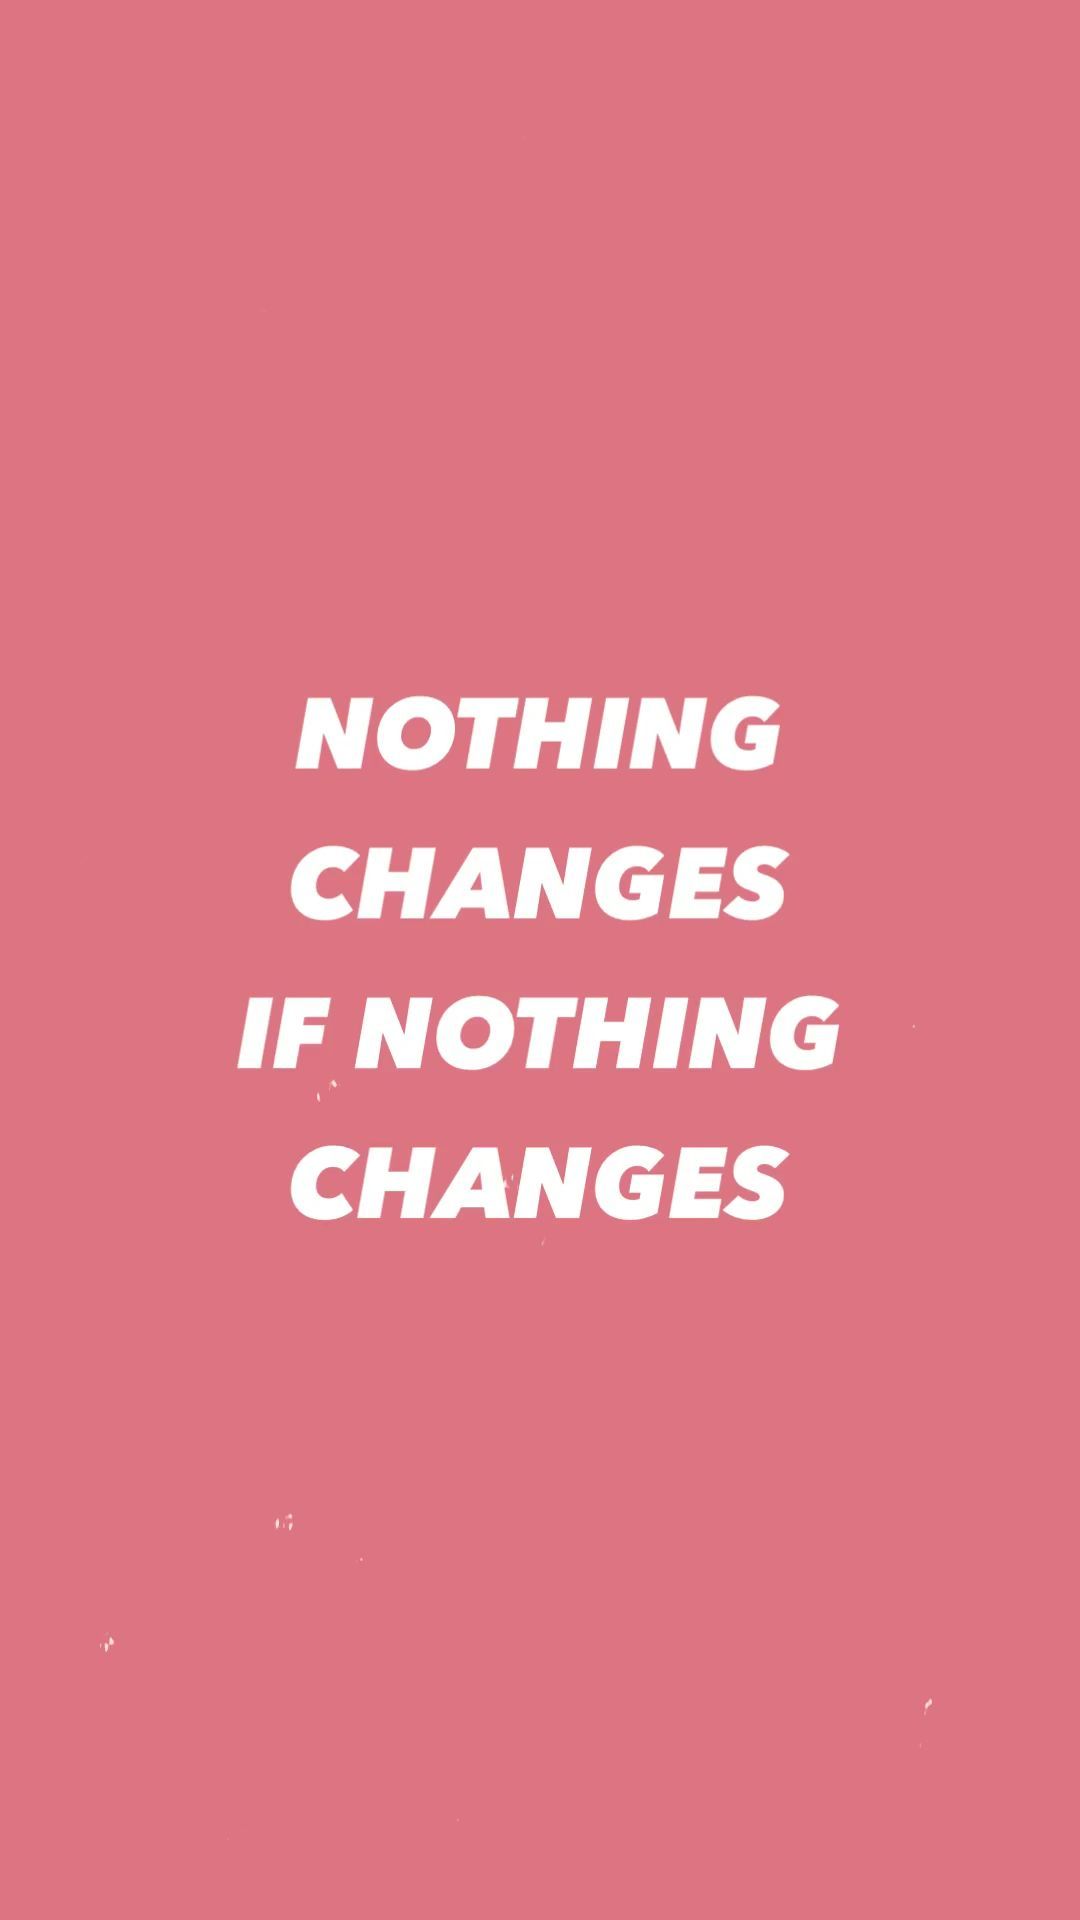 Motivational quote - nothing changes - Motivational quote - nothing changes -   18 beauty Secrets quotes ideas